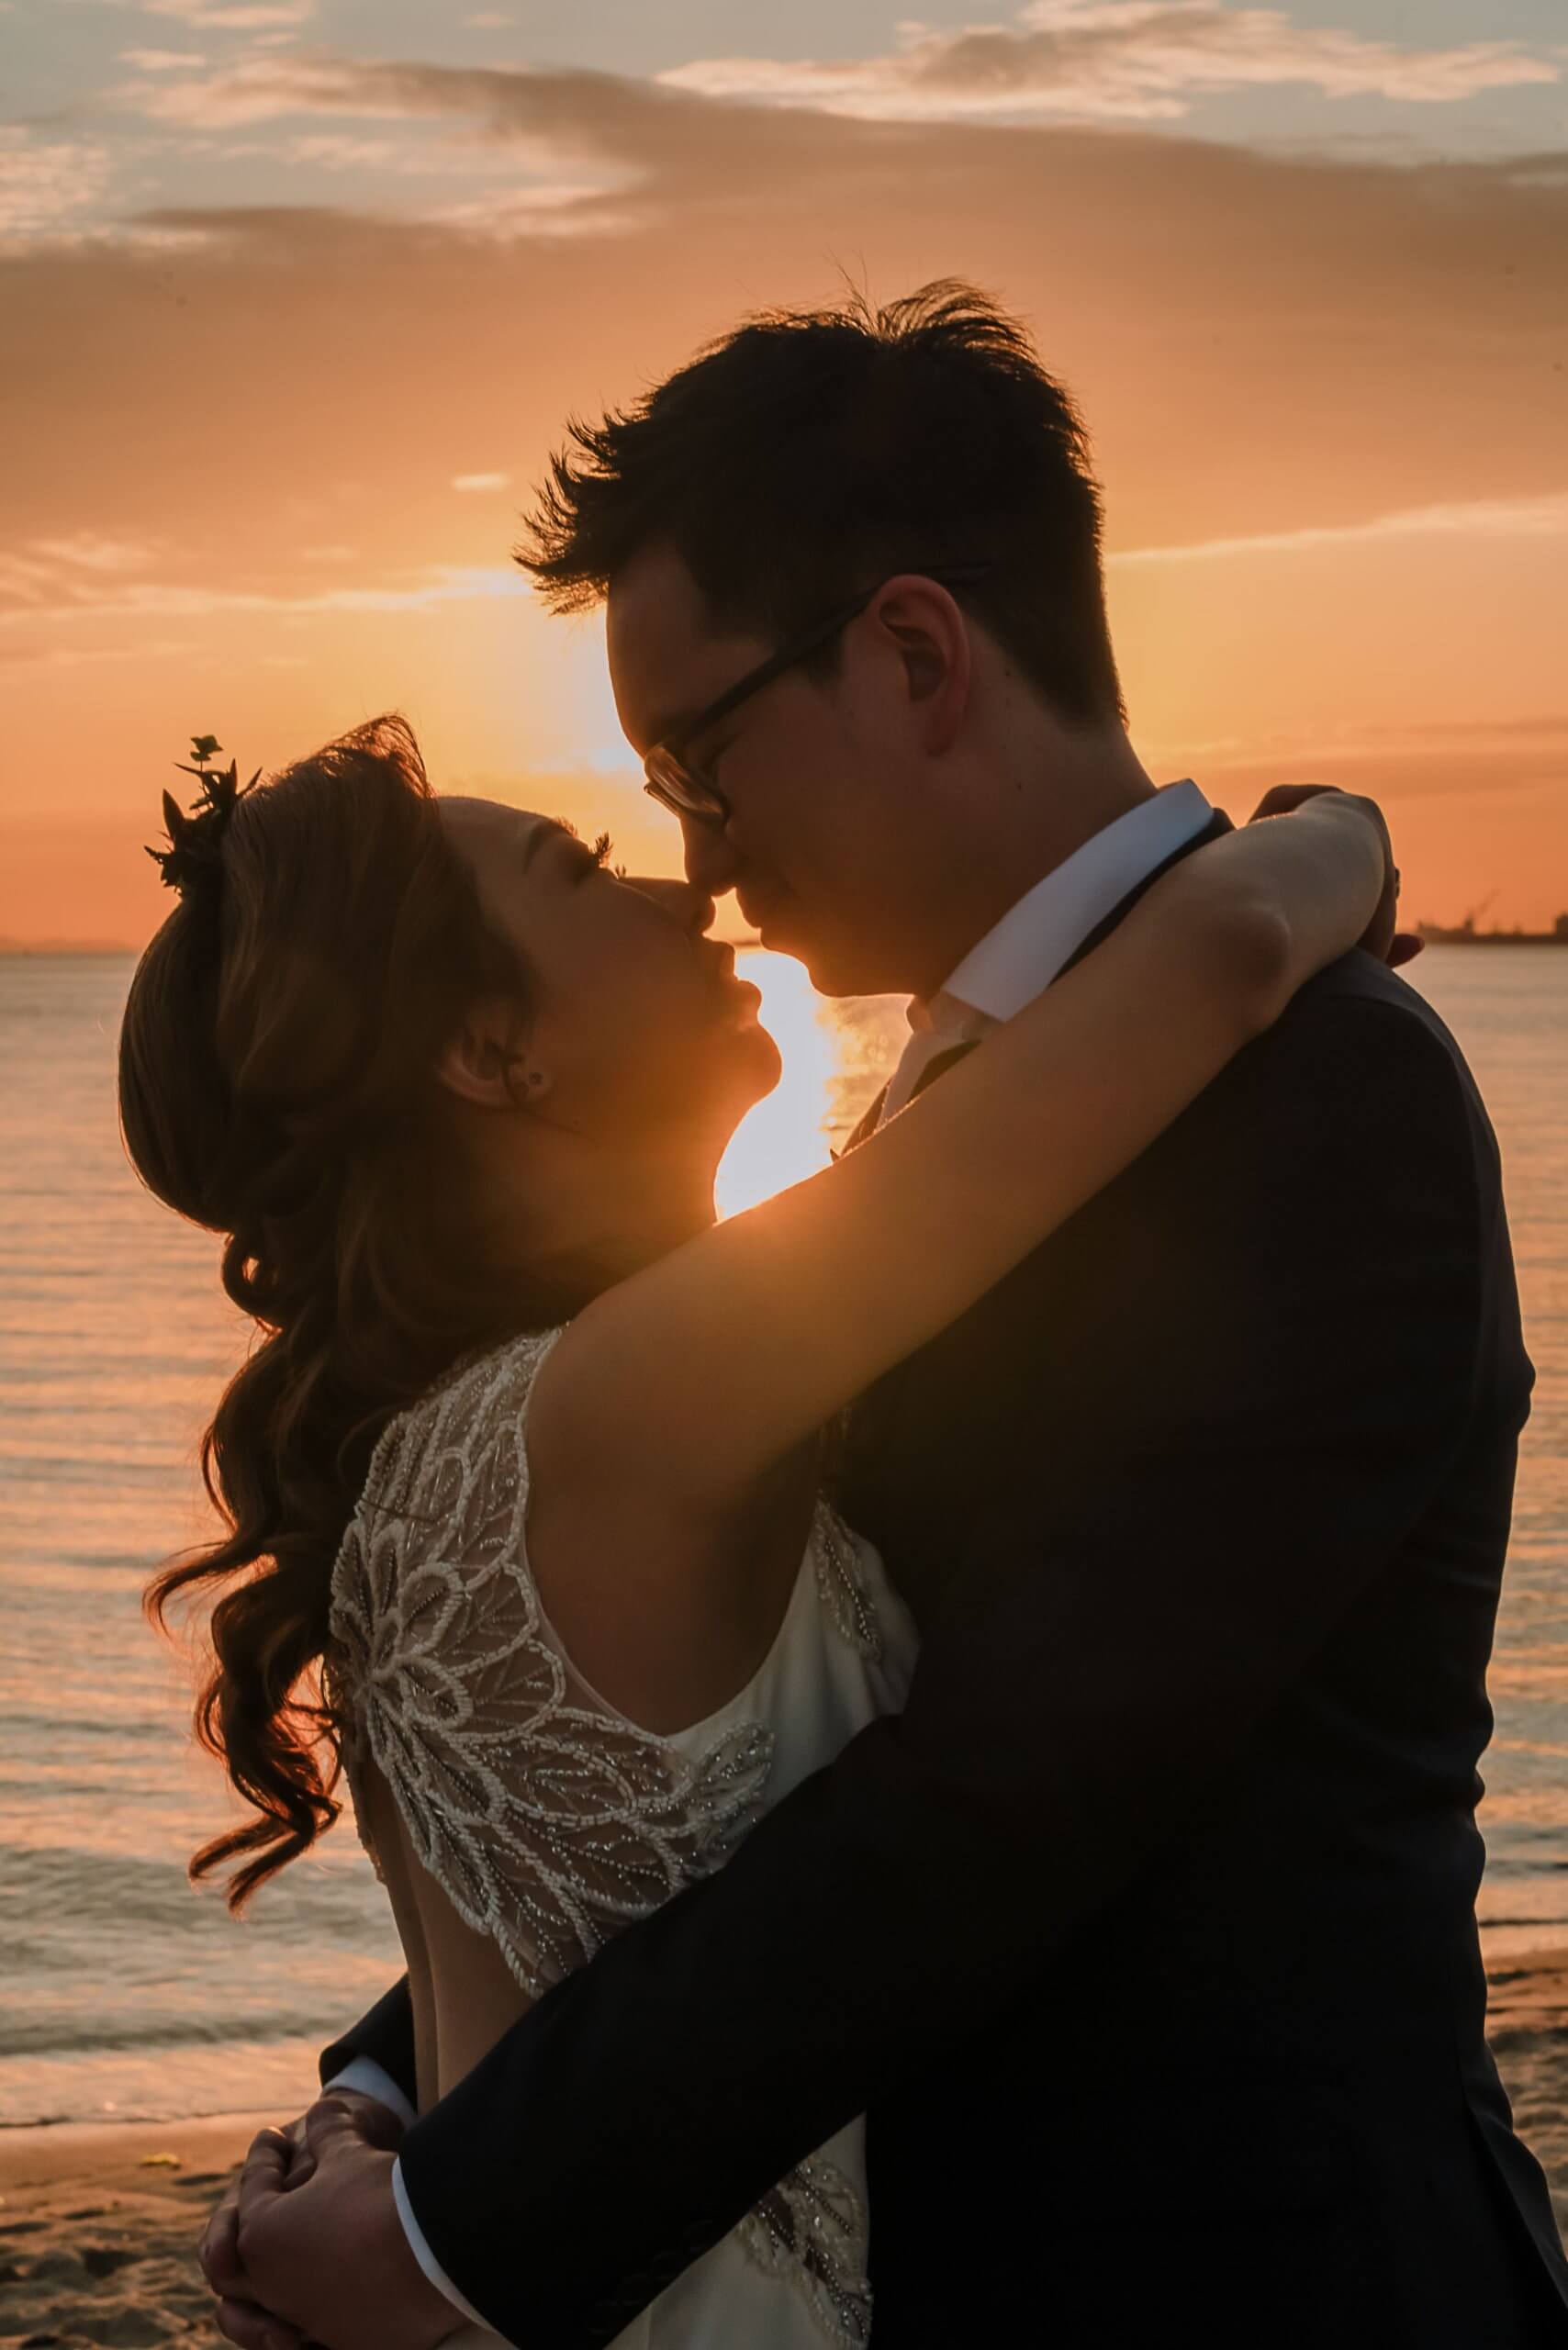 With the sea and the sunset as the backdrop, the bride and groom embraces each other lovingly.